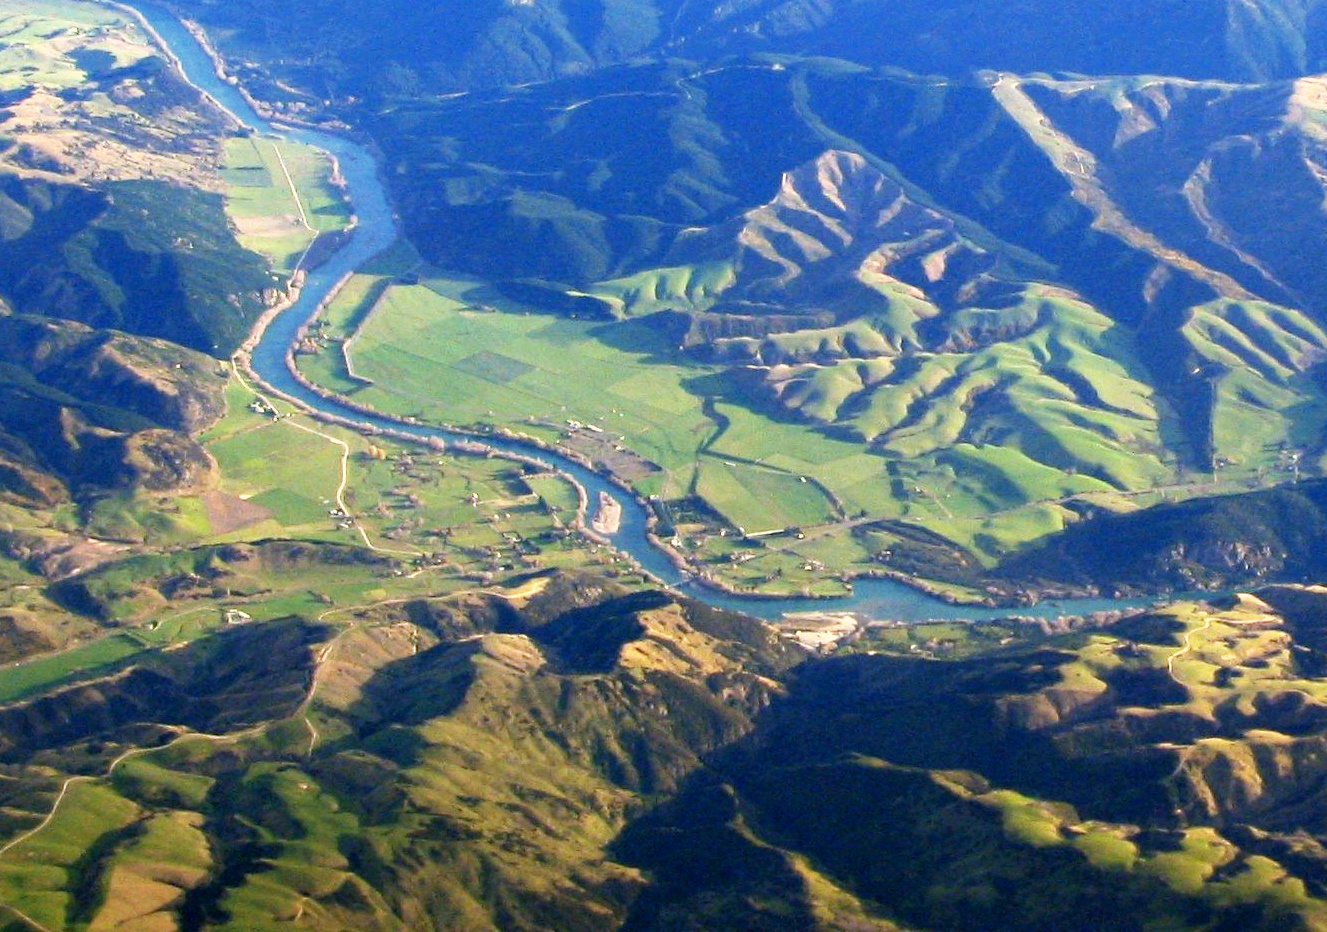 Beaumont,_New_Zealand_aerial_photo_2006